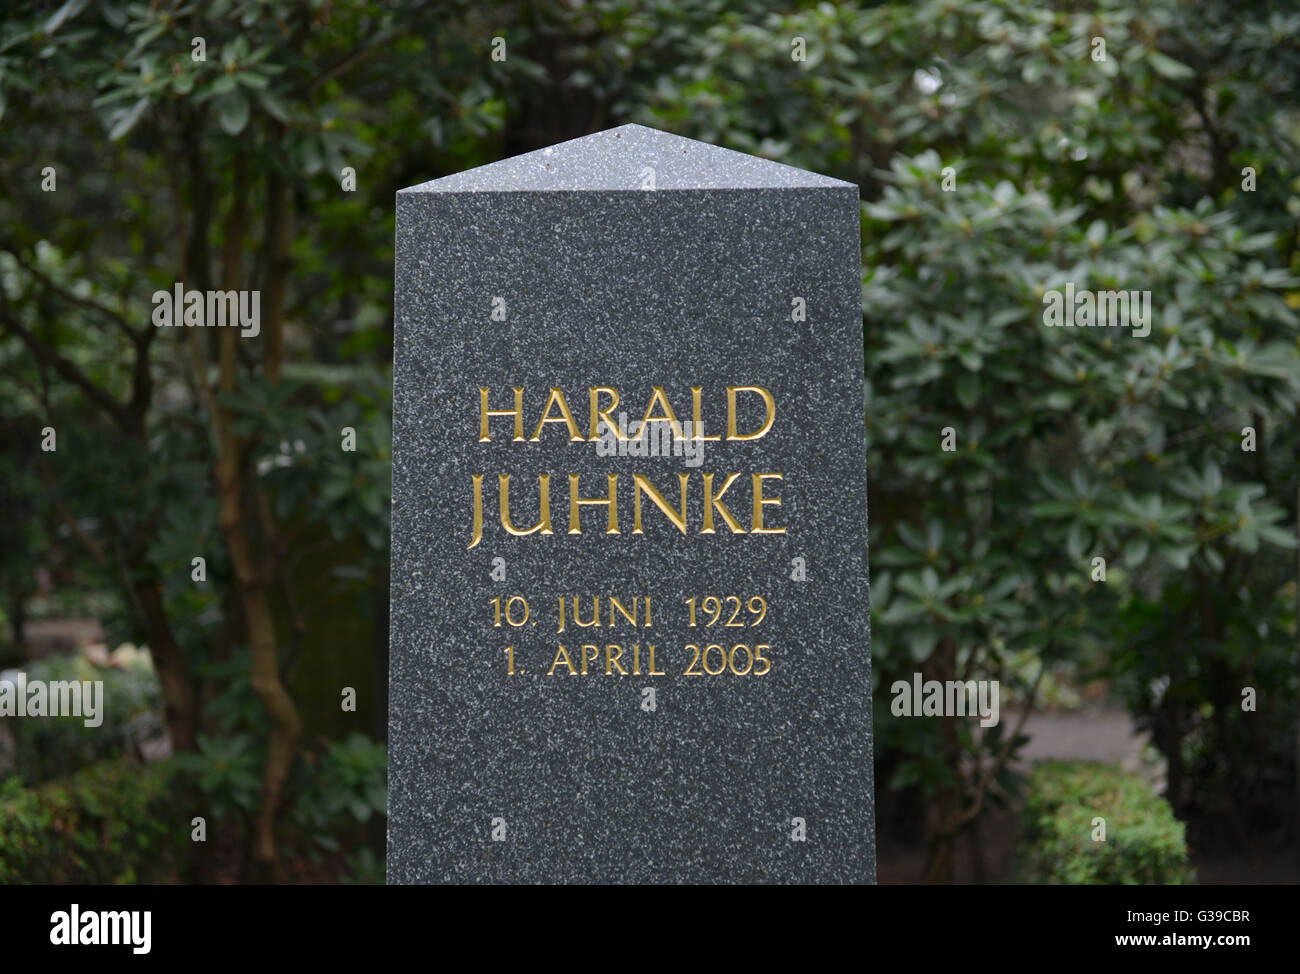 Harald juhnke hi-res stock photography and images - Page 2 - Alamy